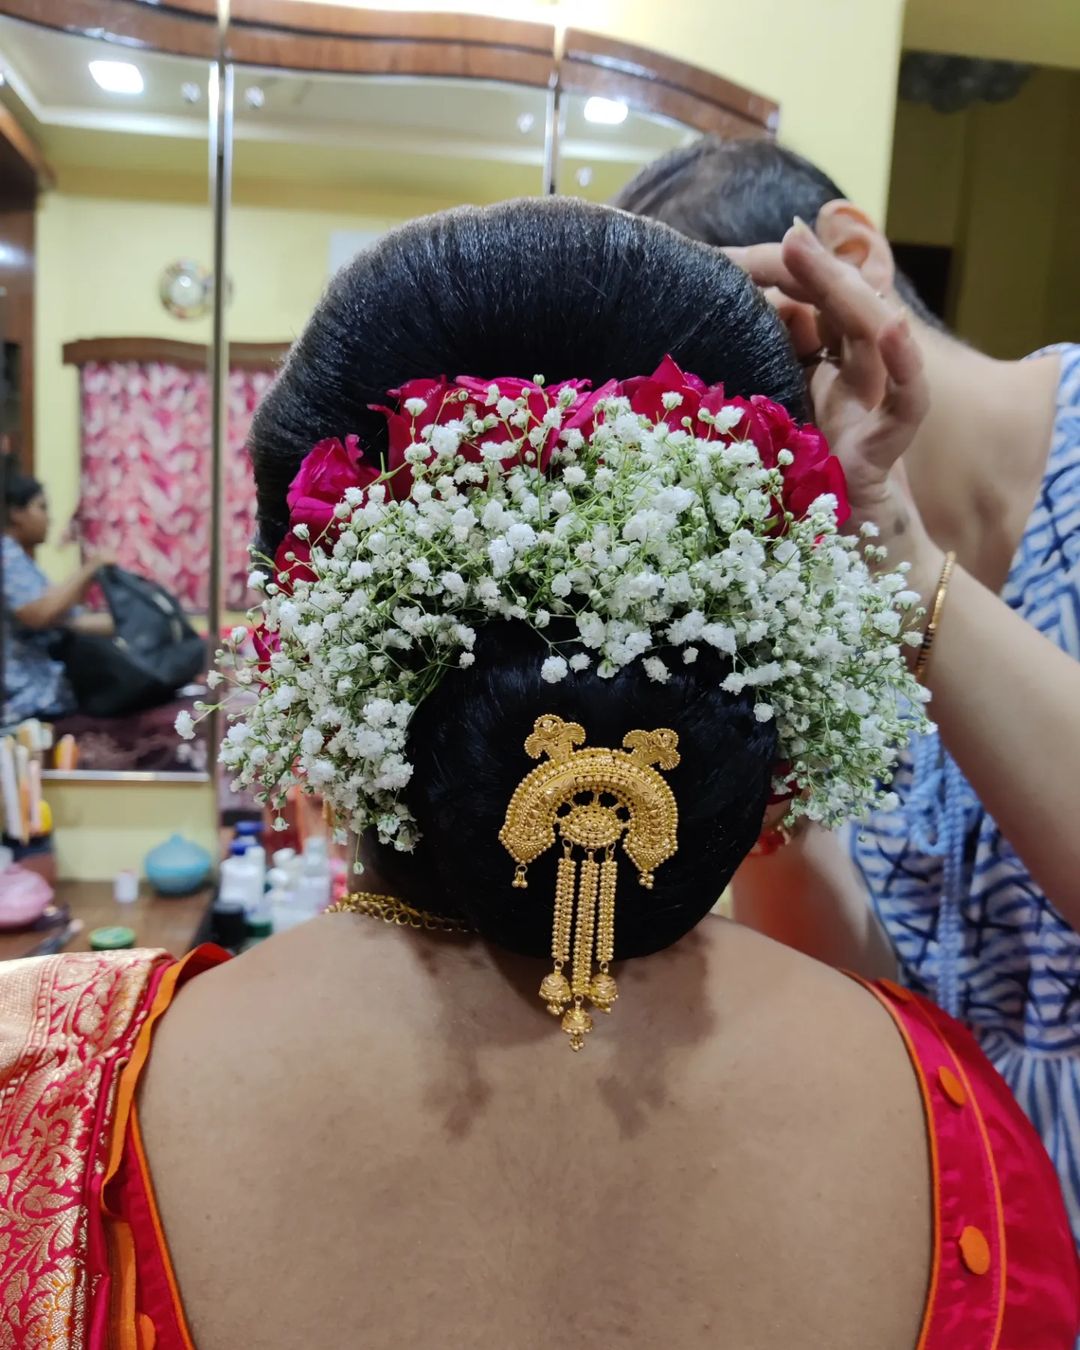 7 Indian Hair Style For Bengali bride You Should Know